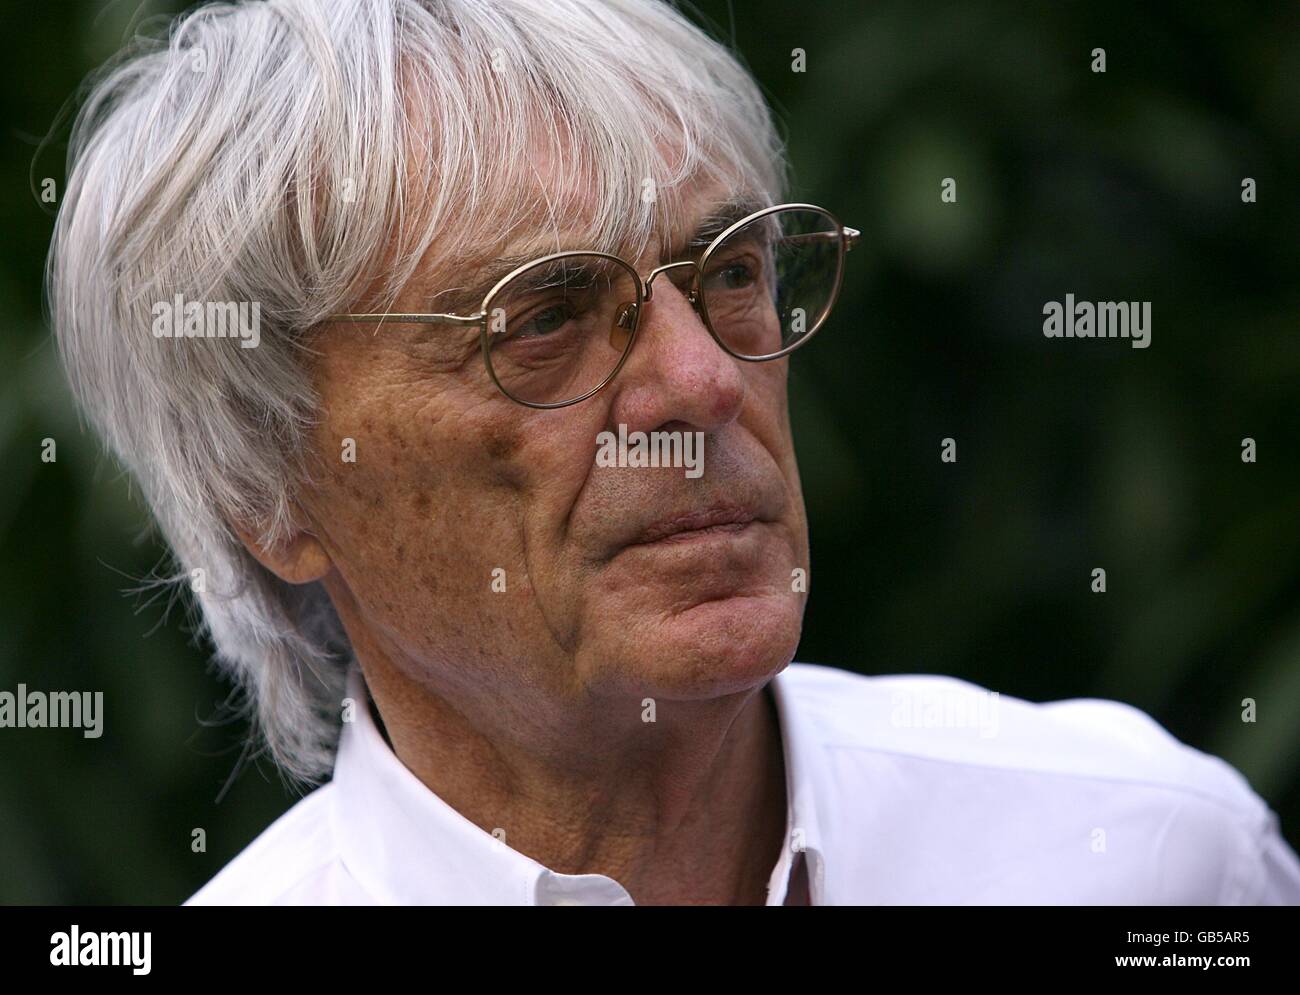 Motor Racing - Formula One Singtel Singapore Grand Prix - Race - Marina Bay Circuit Park. President and CEO of F1 Management Bernie Ecclestone ahead of the night's race in Singapore Stock Photo